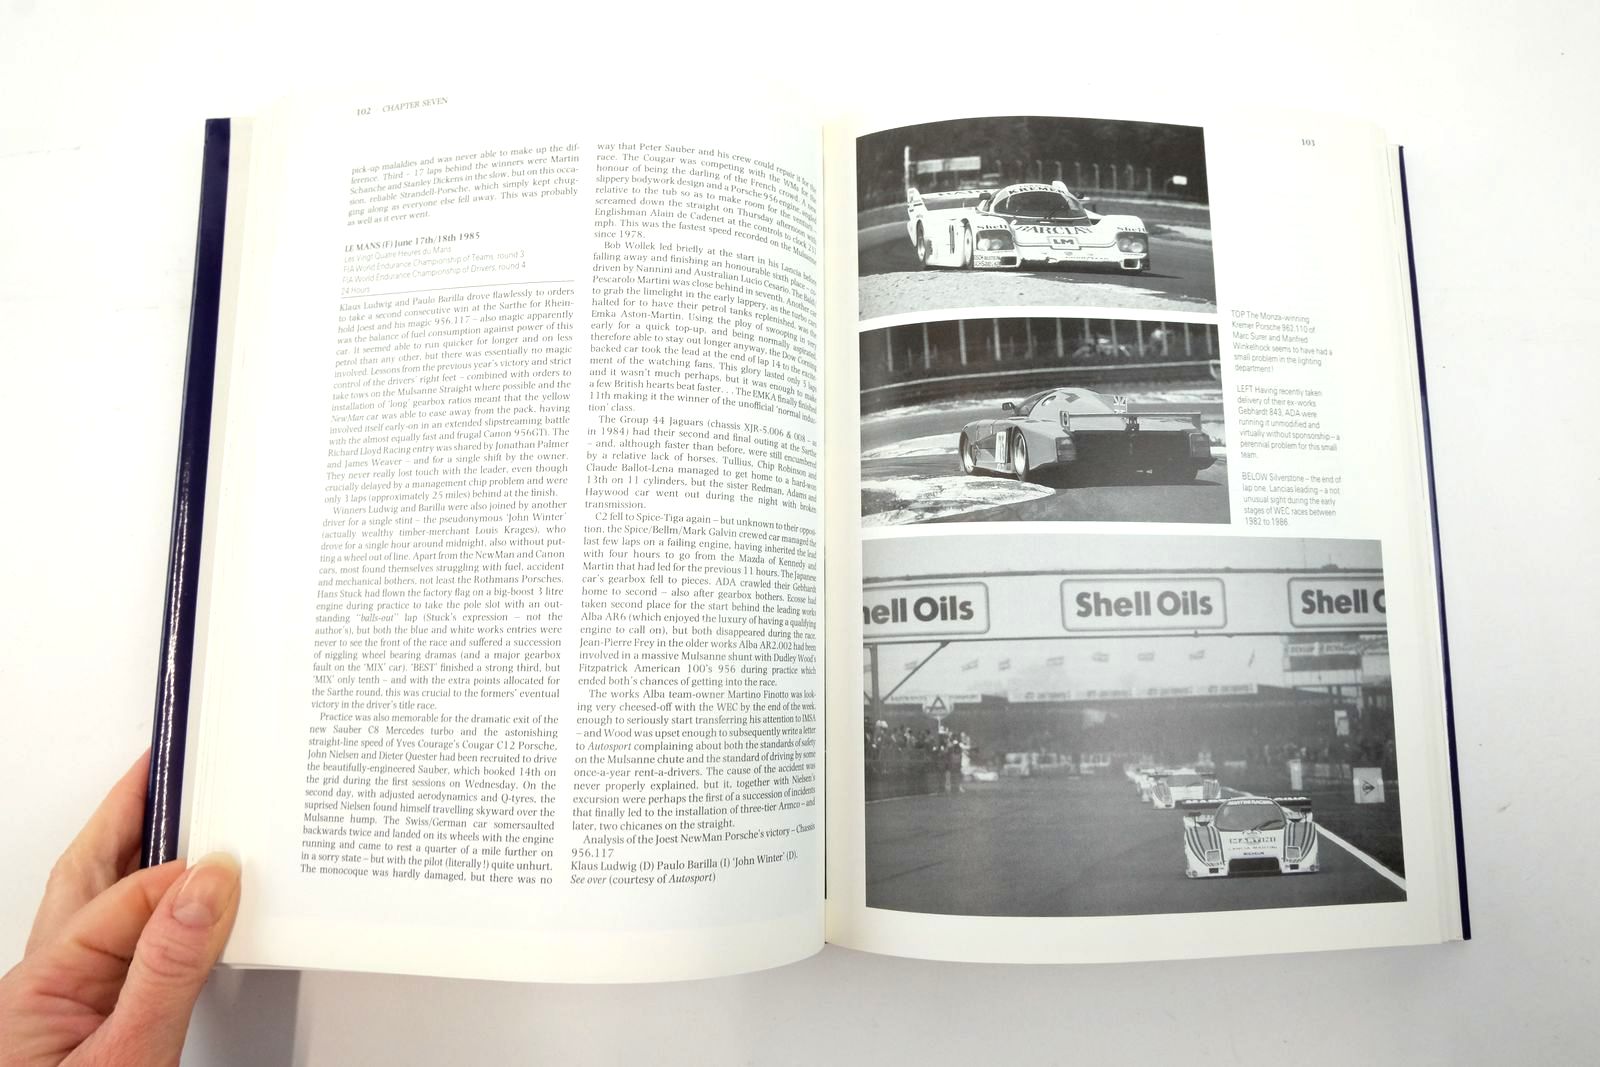 Photo of ENDURANCE RACING 1982-1991 written by Briggs, Ian published by Osprey Automotive (STOCK CODE: 2137499)  for sale by Stella & Rose's Books